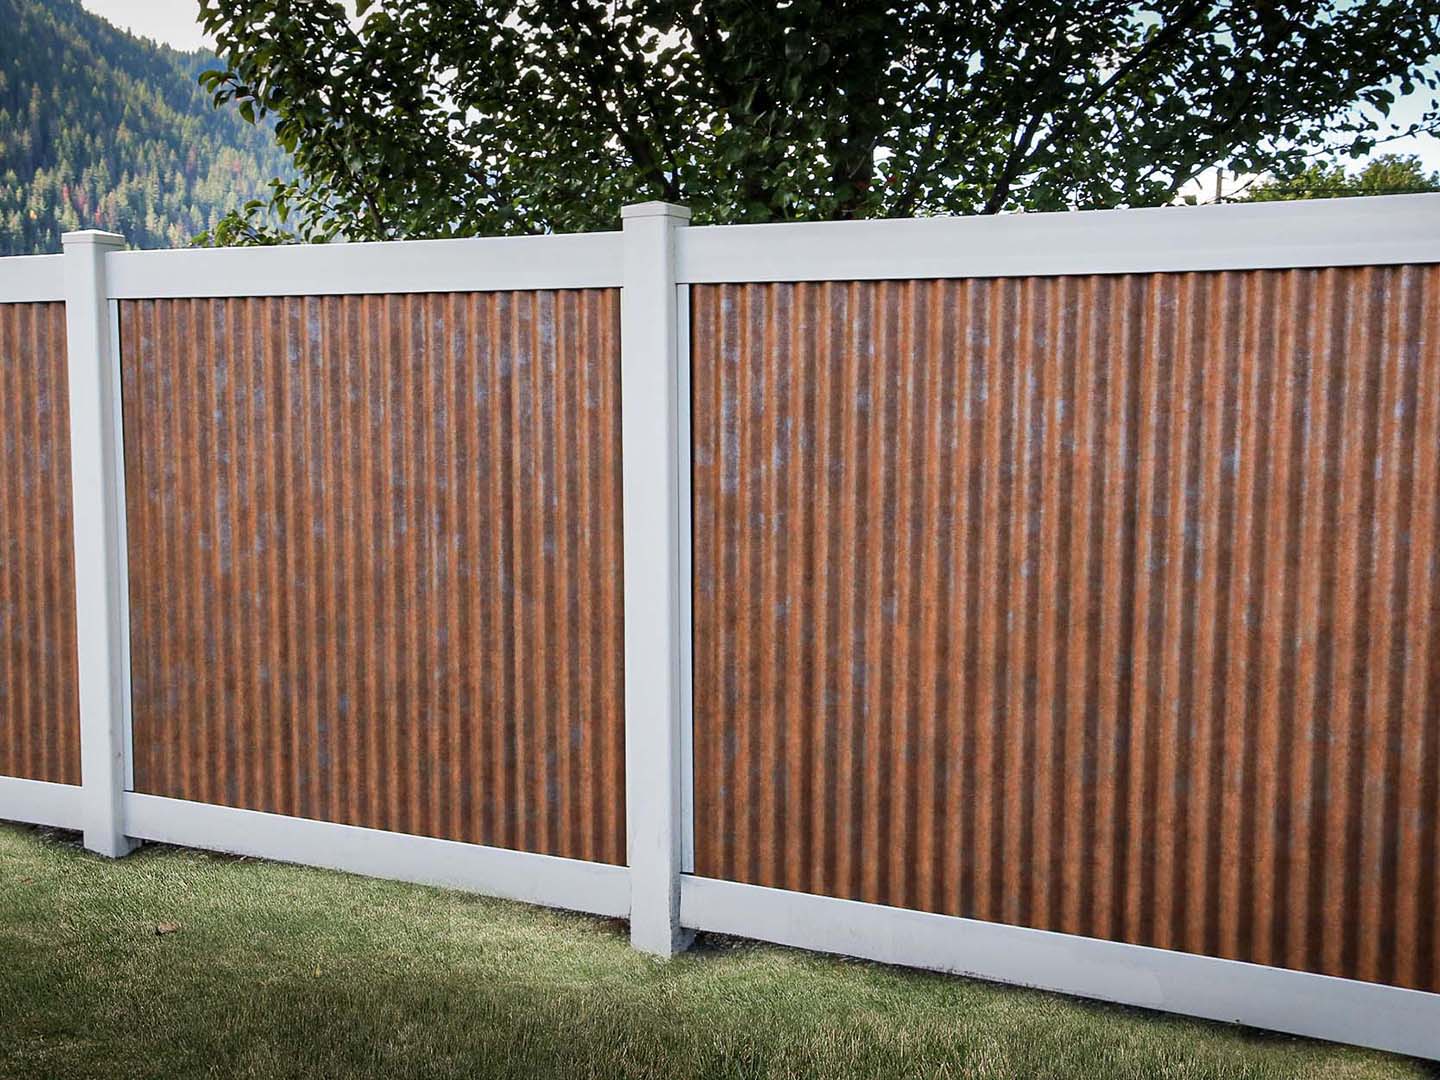 Lake Country British Columbia Fence Project Photo